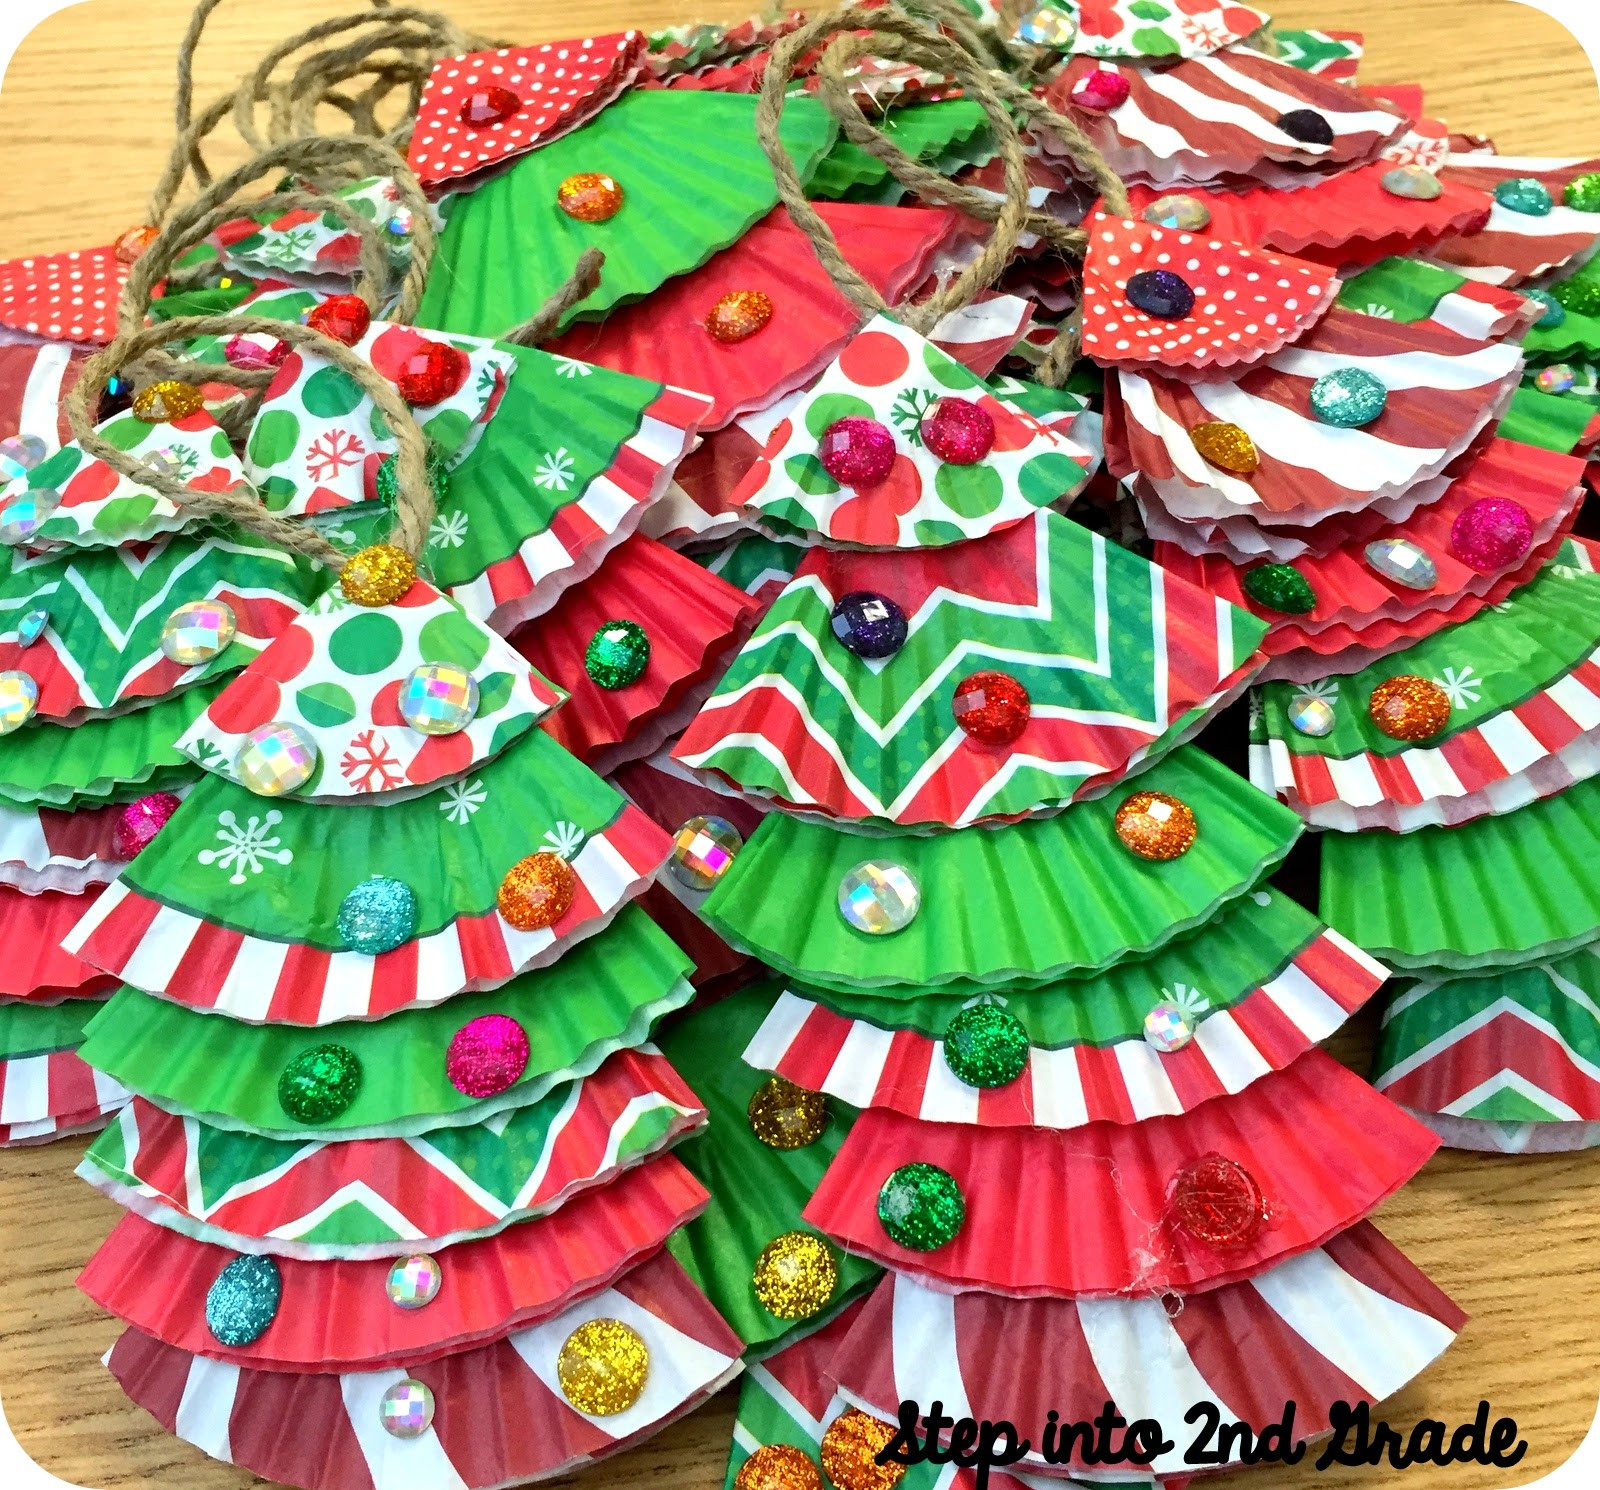 2Nd Grade Holiday Party Ideas
 Step into 2nd Grade with Mrs Lemons A Whole Lotta Christmas